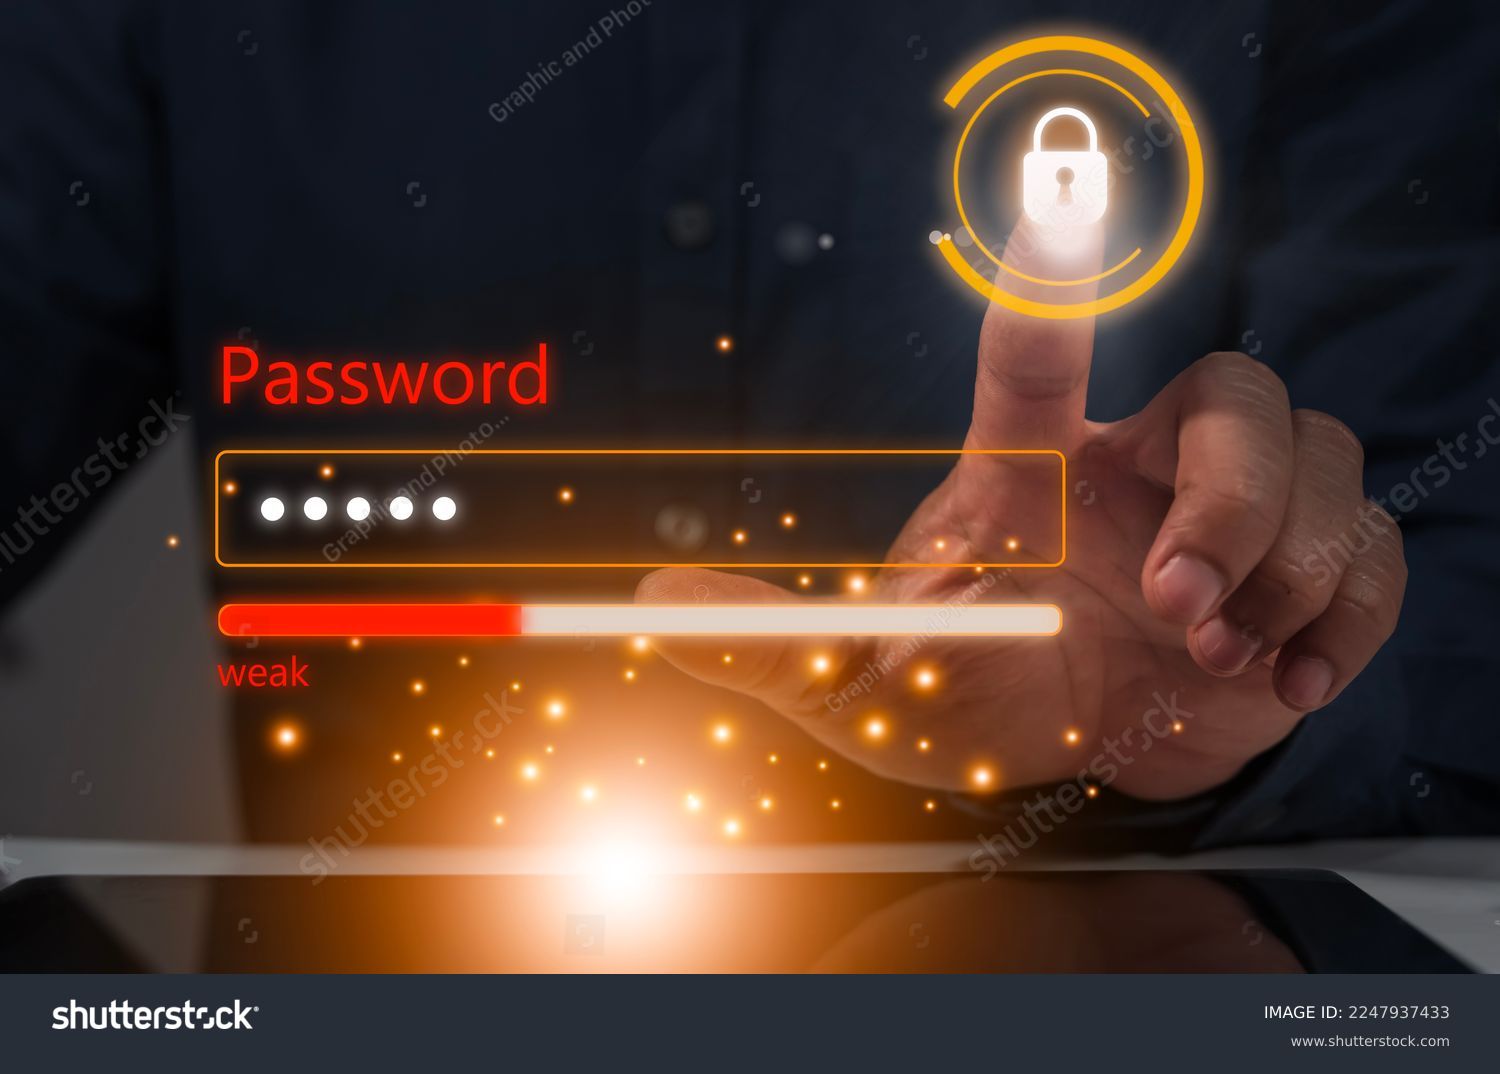 Secure internet access and personal information security. Type your login and password on the virtual screen. Protect personal information from hackers. weak data protection. #2247937433